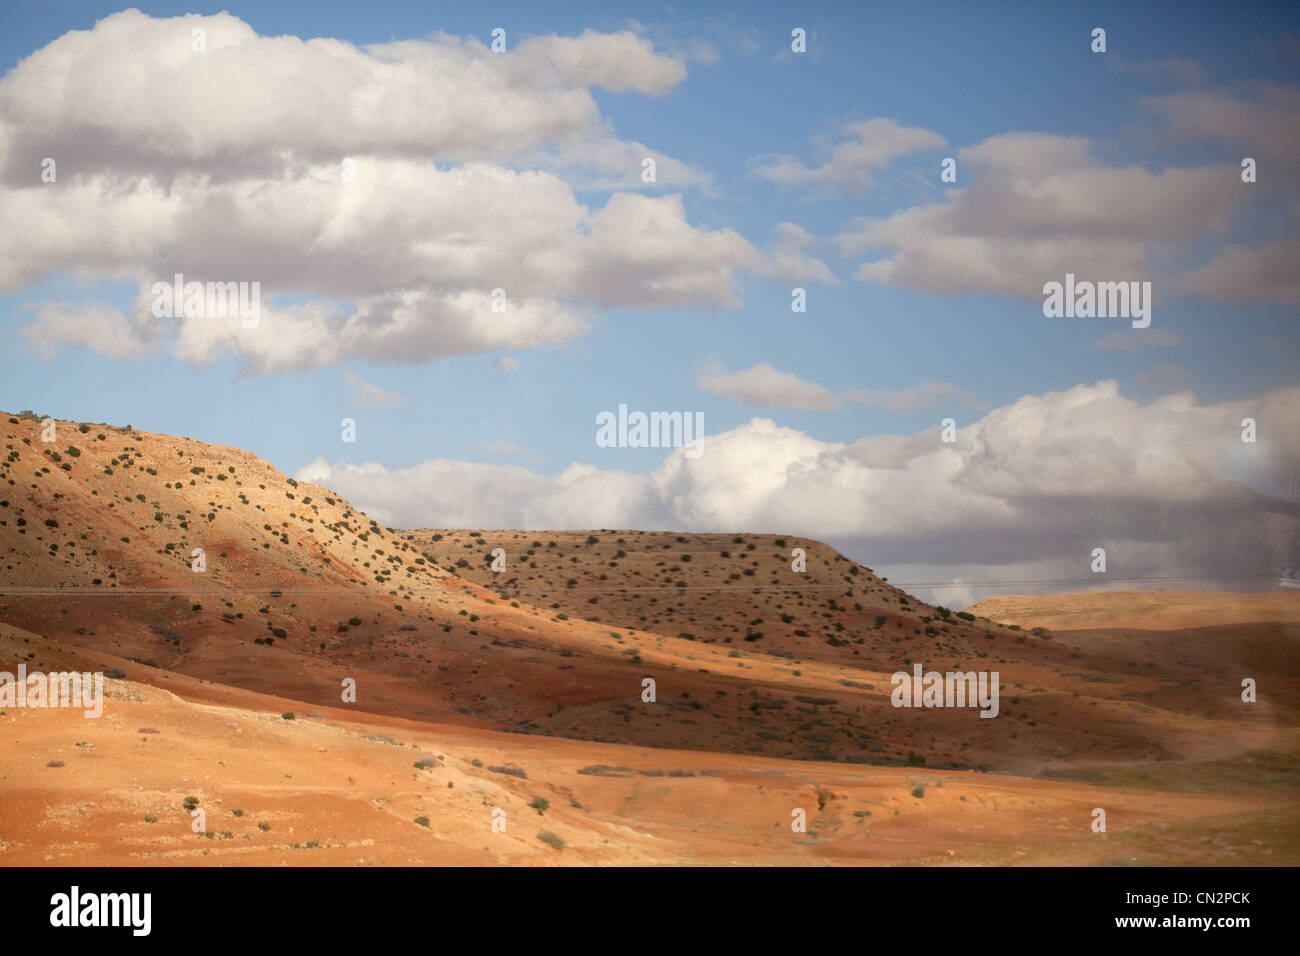 Mountain scenery, Morocco, North Africa Stock Photo